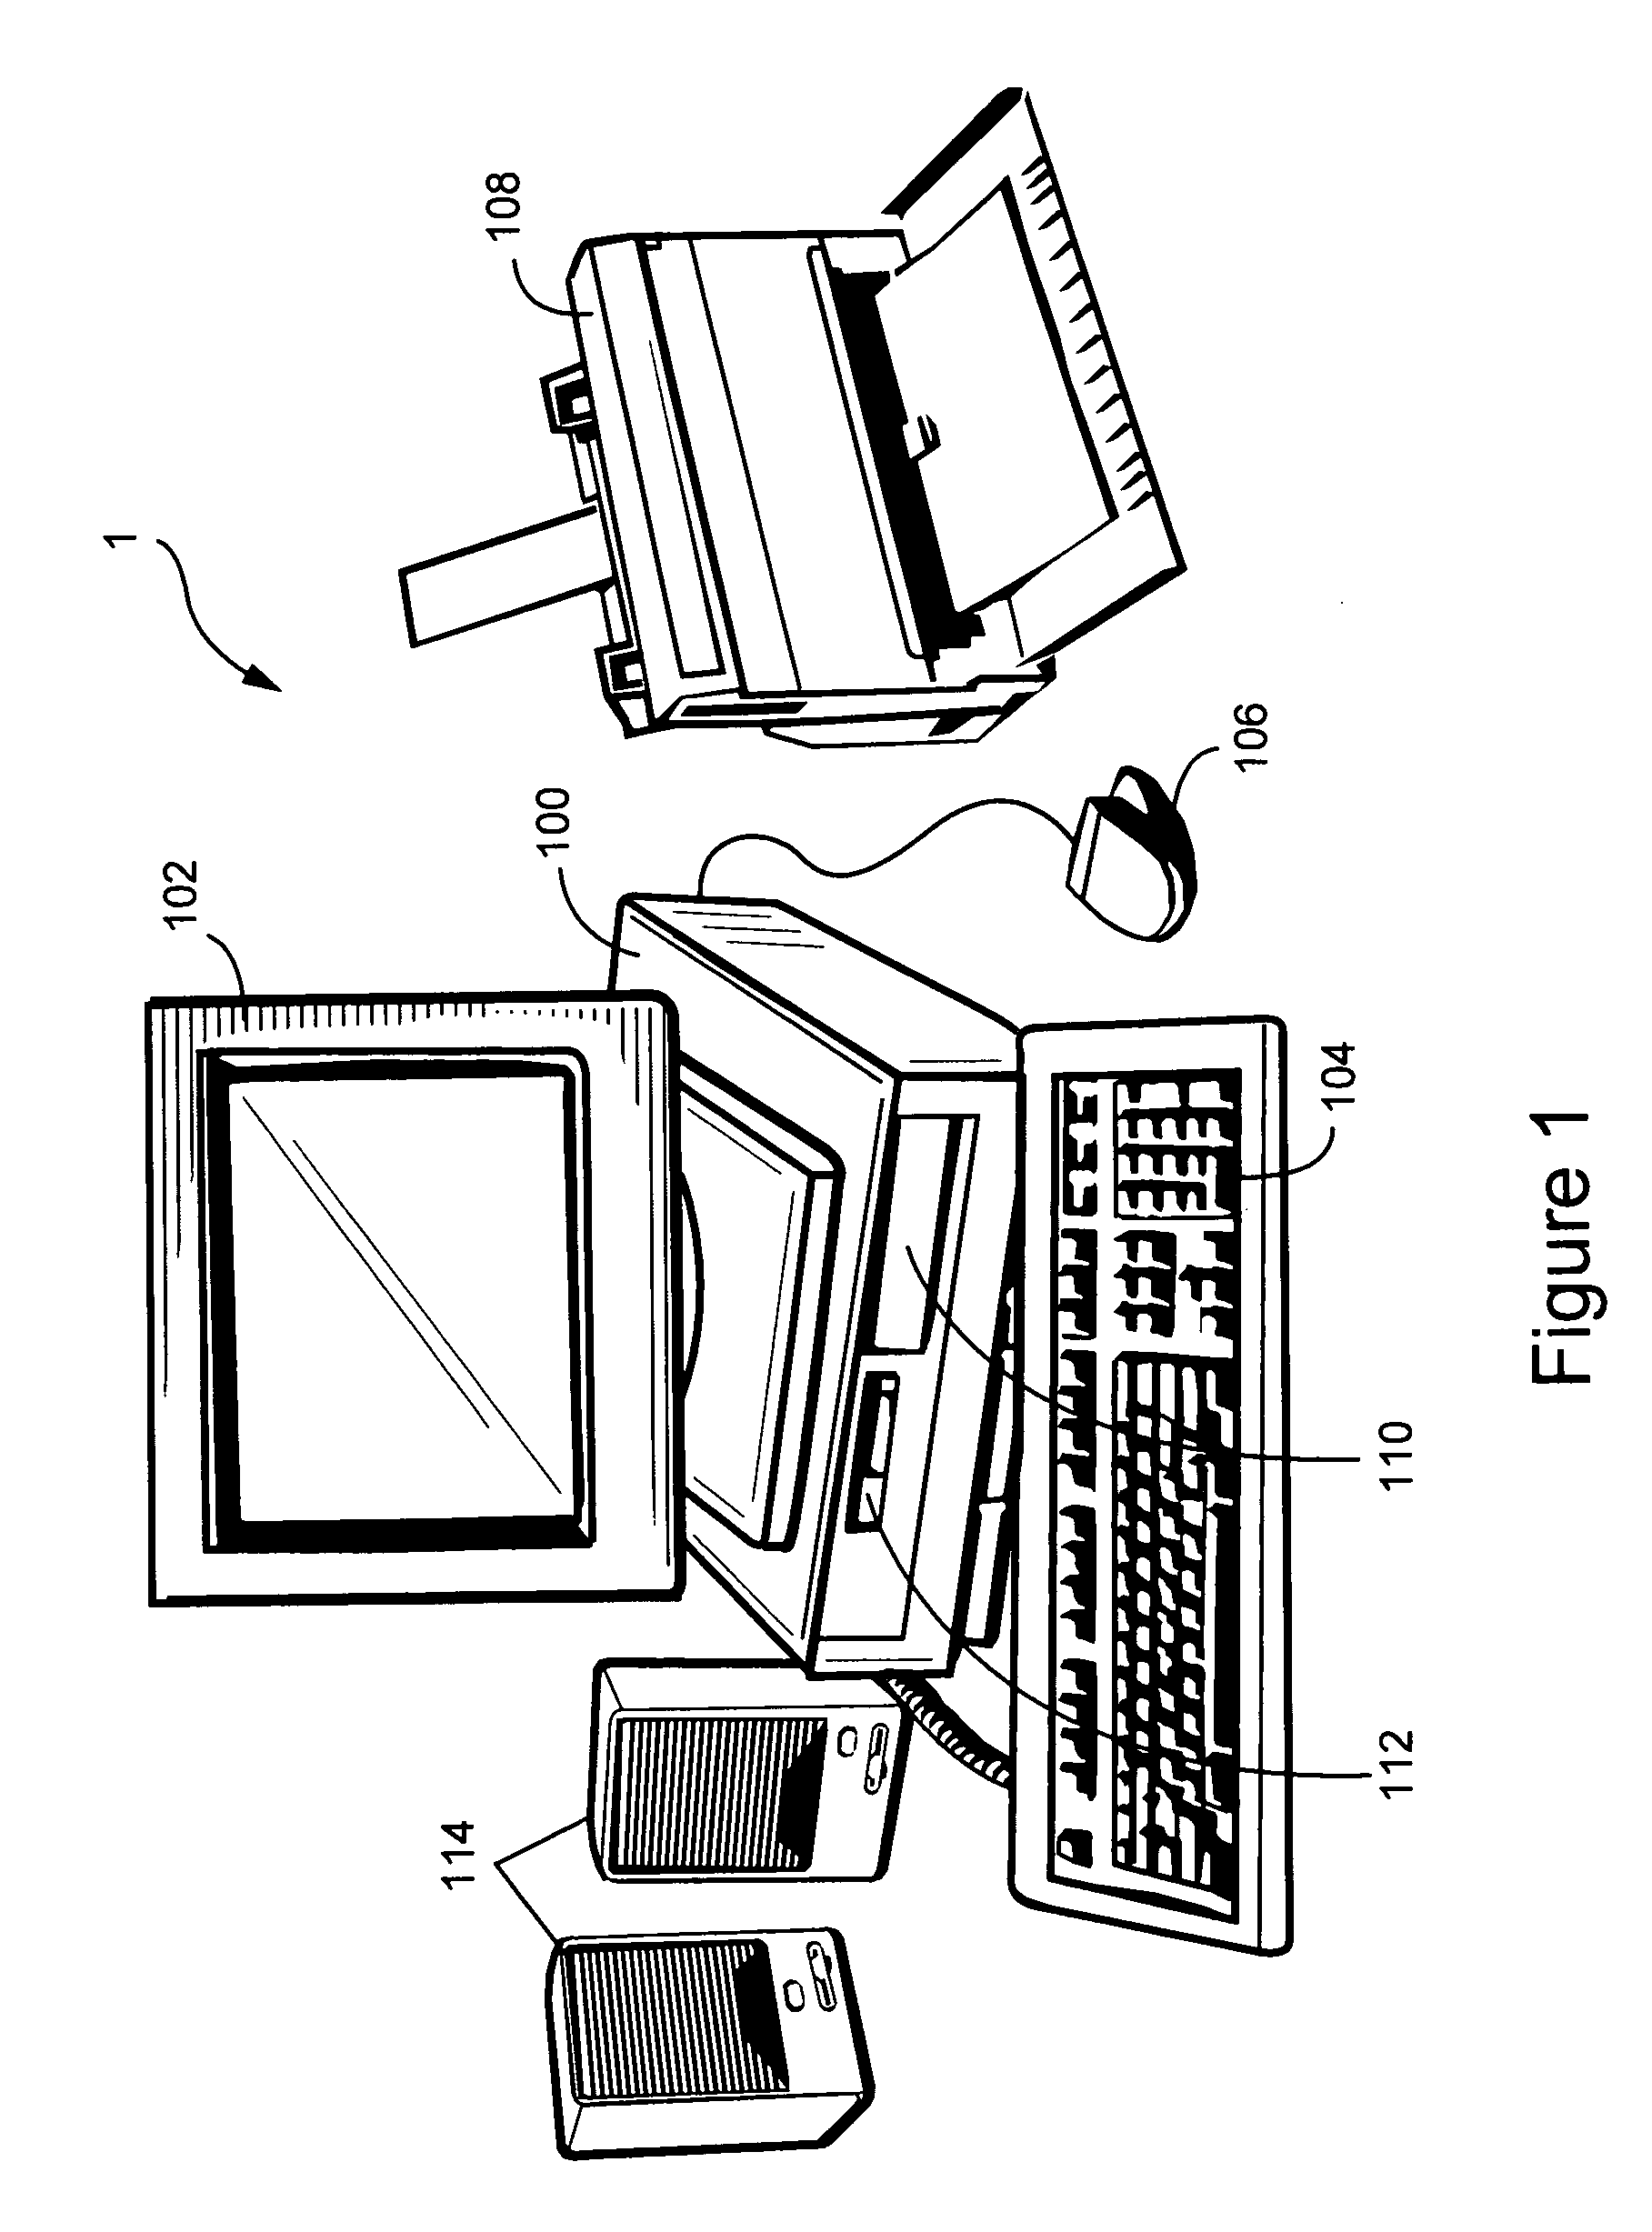 Method and apparatus for generating an integrated view of multiple databases